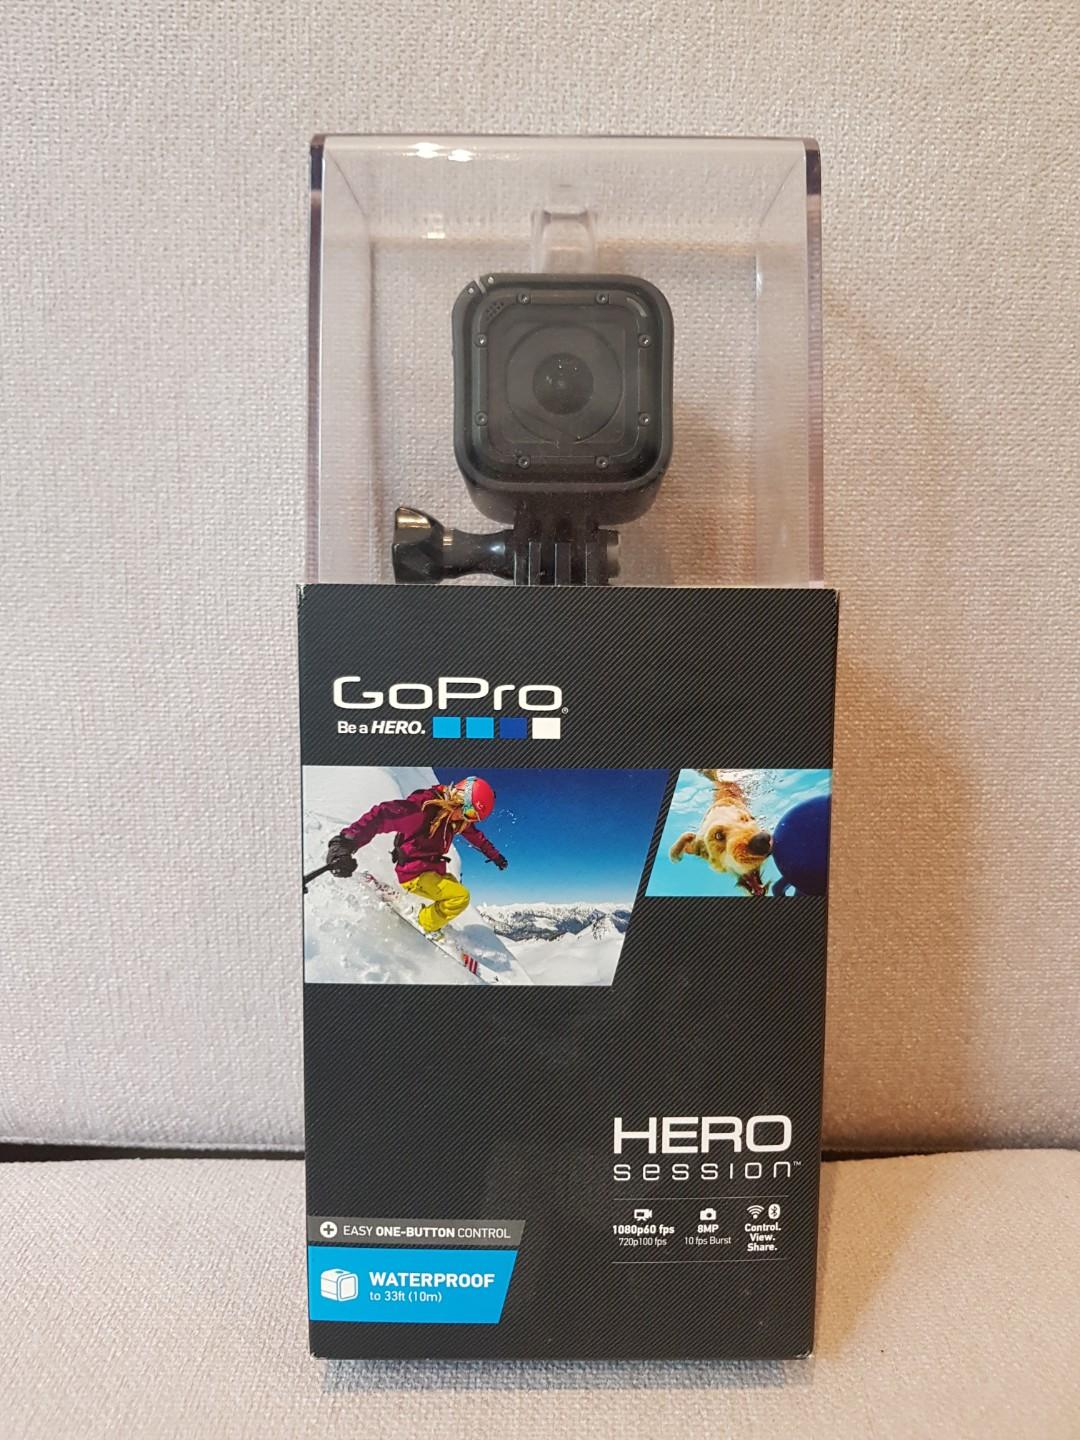 Gopro Hero Session 4 Unused In Packaging Electronics Others On Carousell